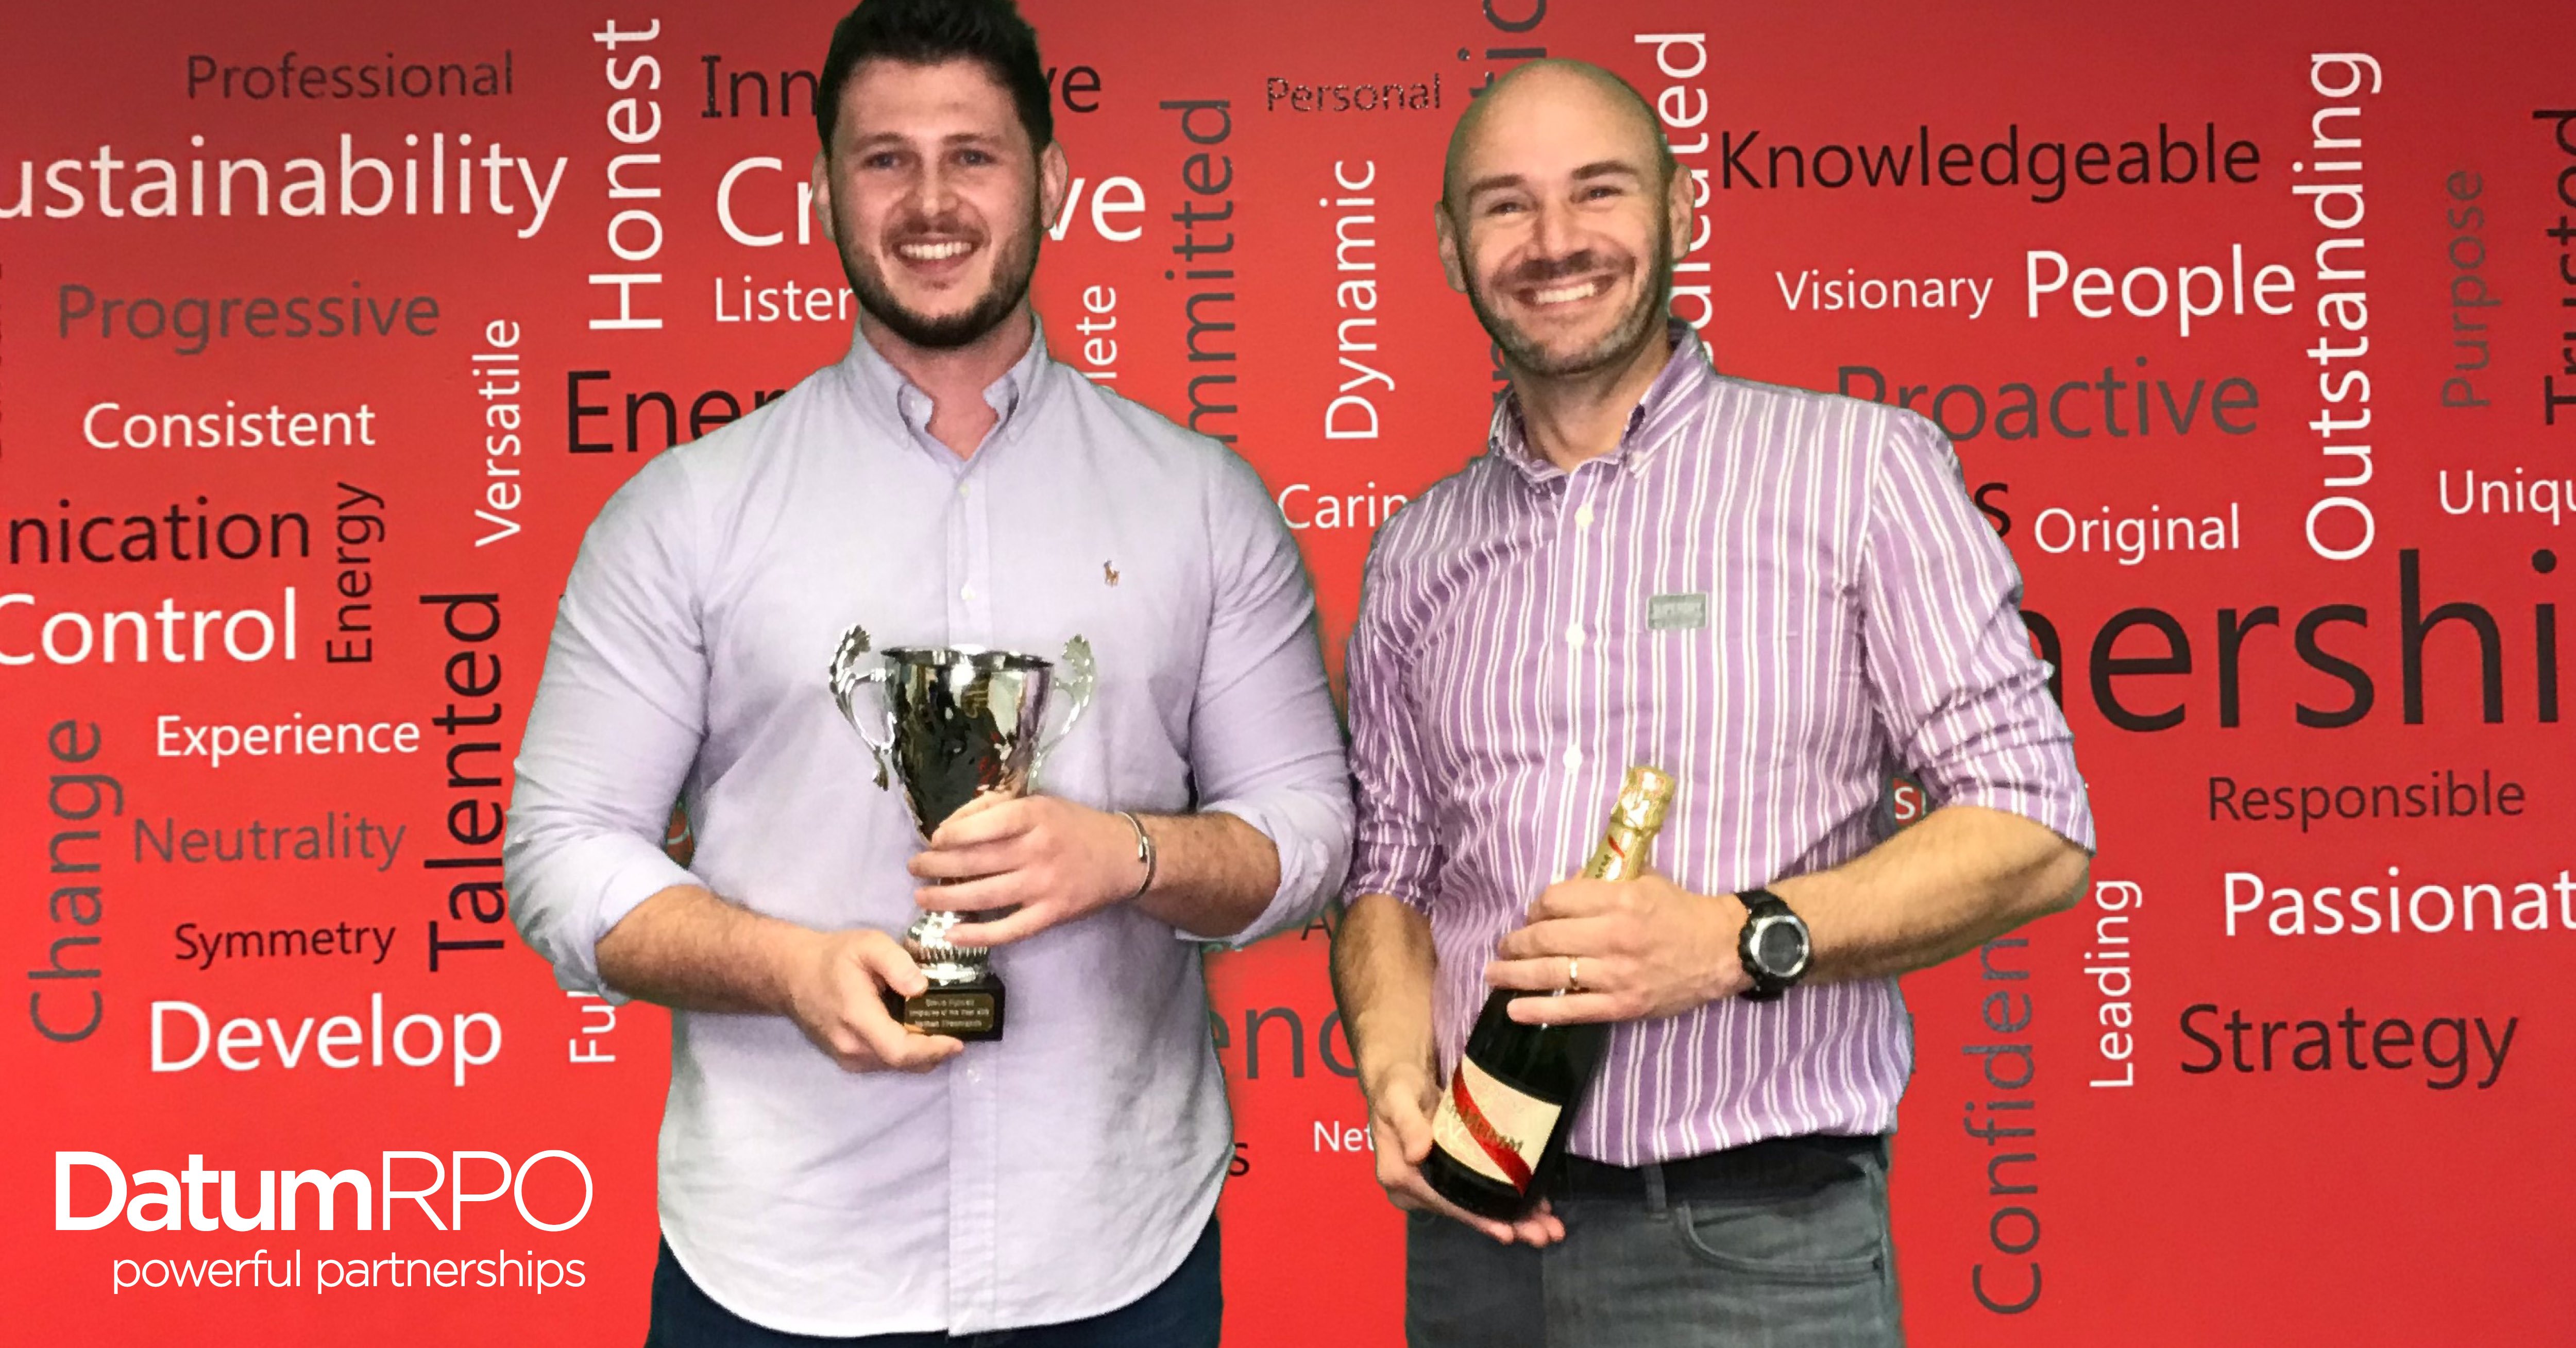 Steve Fulwell Employee of the Year Awards 2018: Winners and runners-up announced!